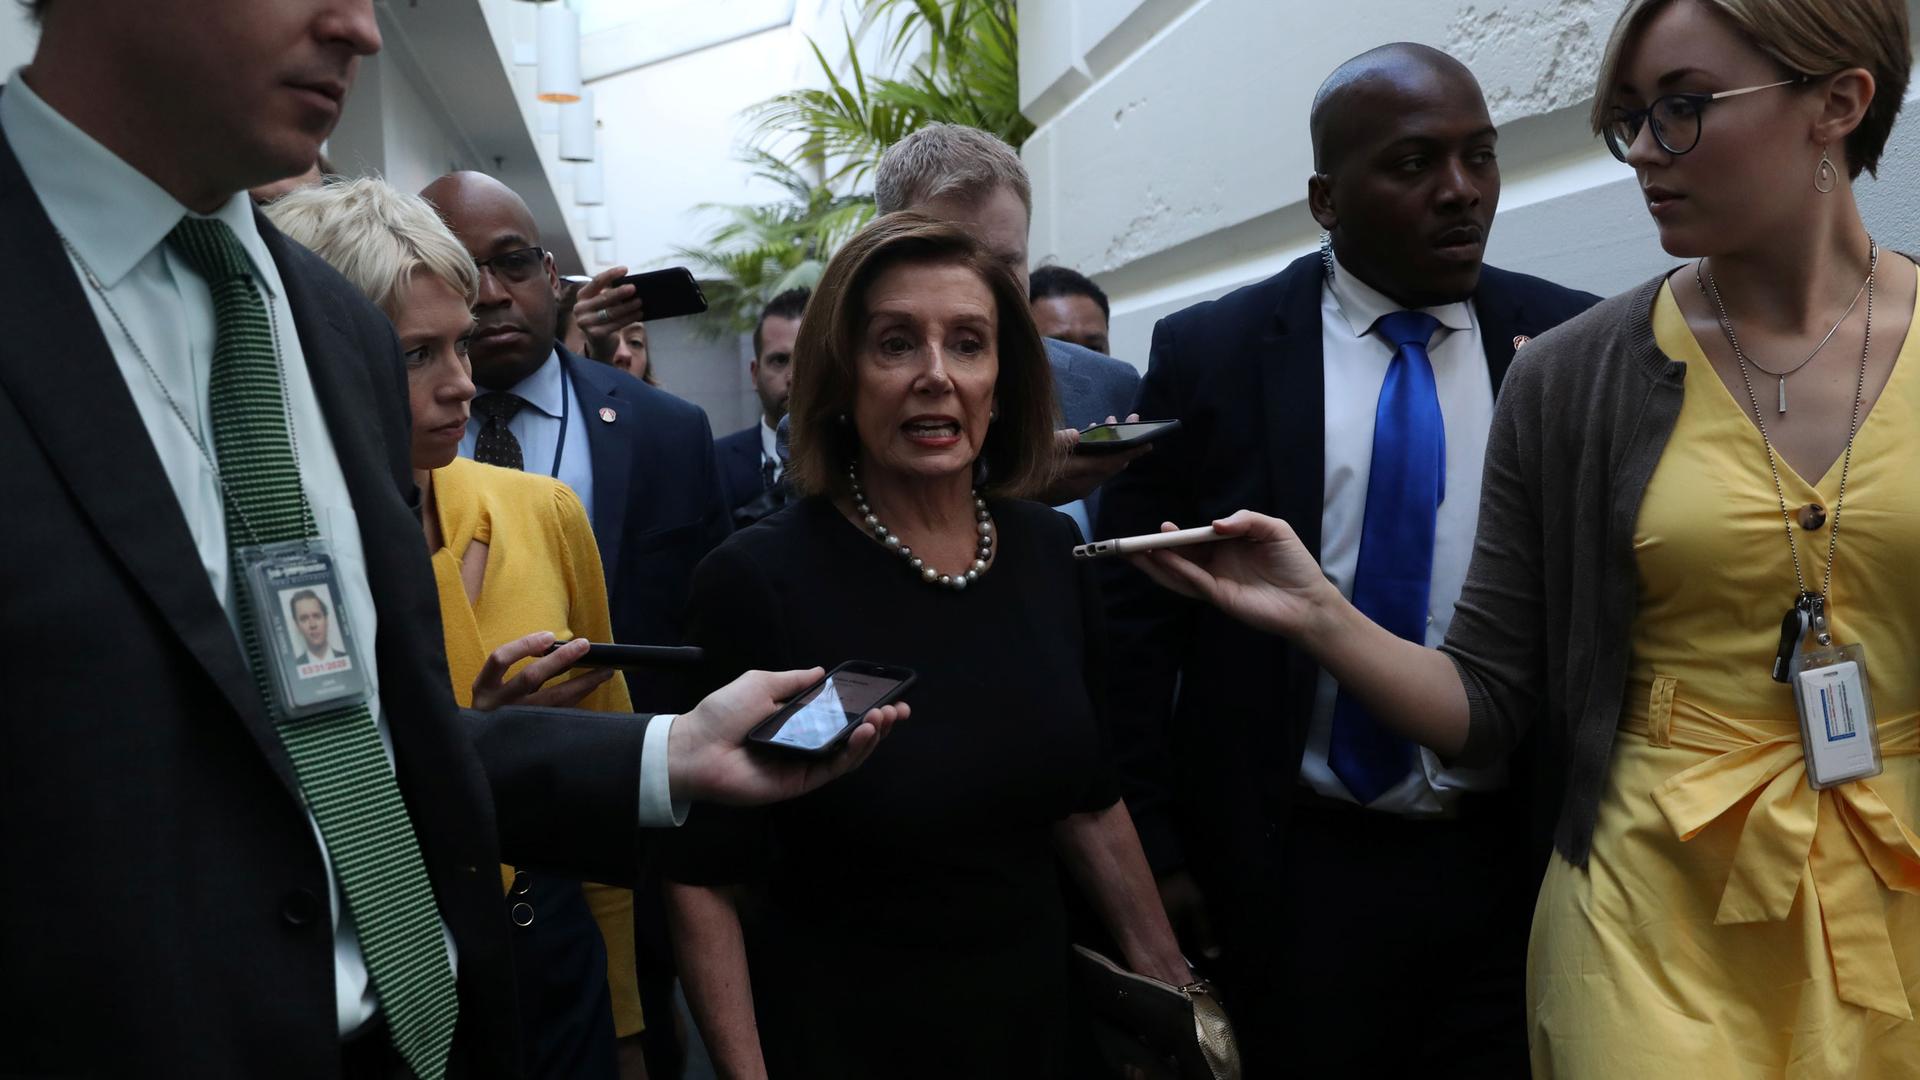 US House Speaker Nancy Pelosi is shown wearing a dark dress and pearls while surrounded by reporters.